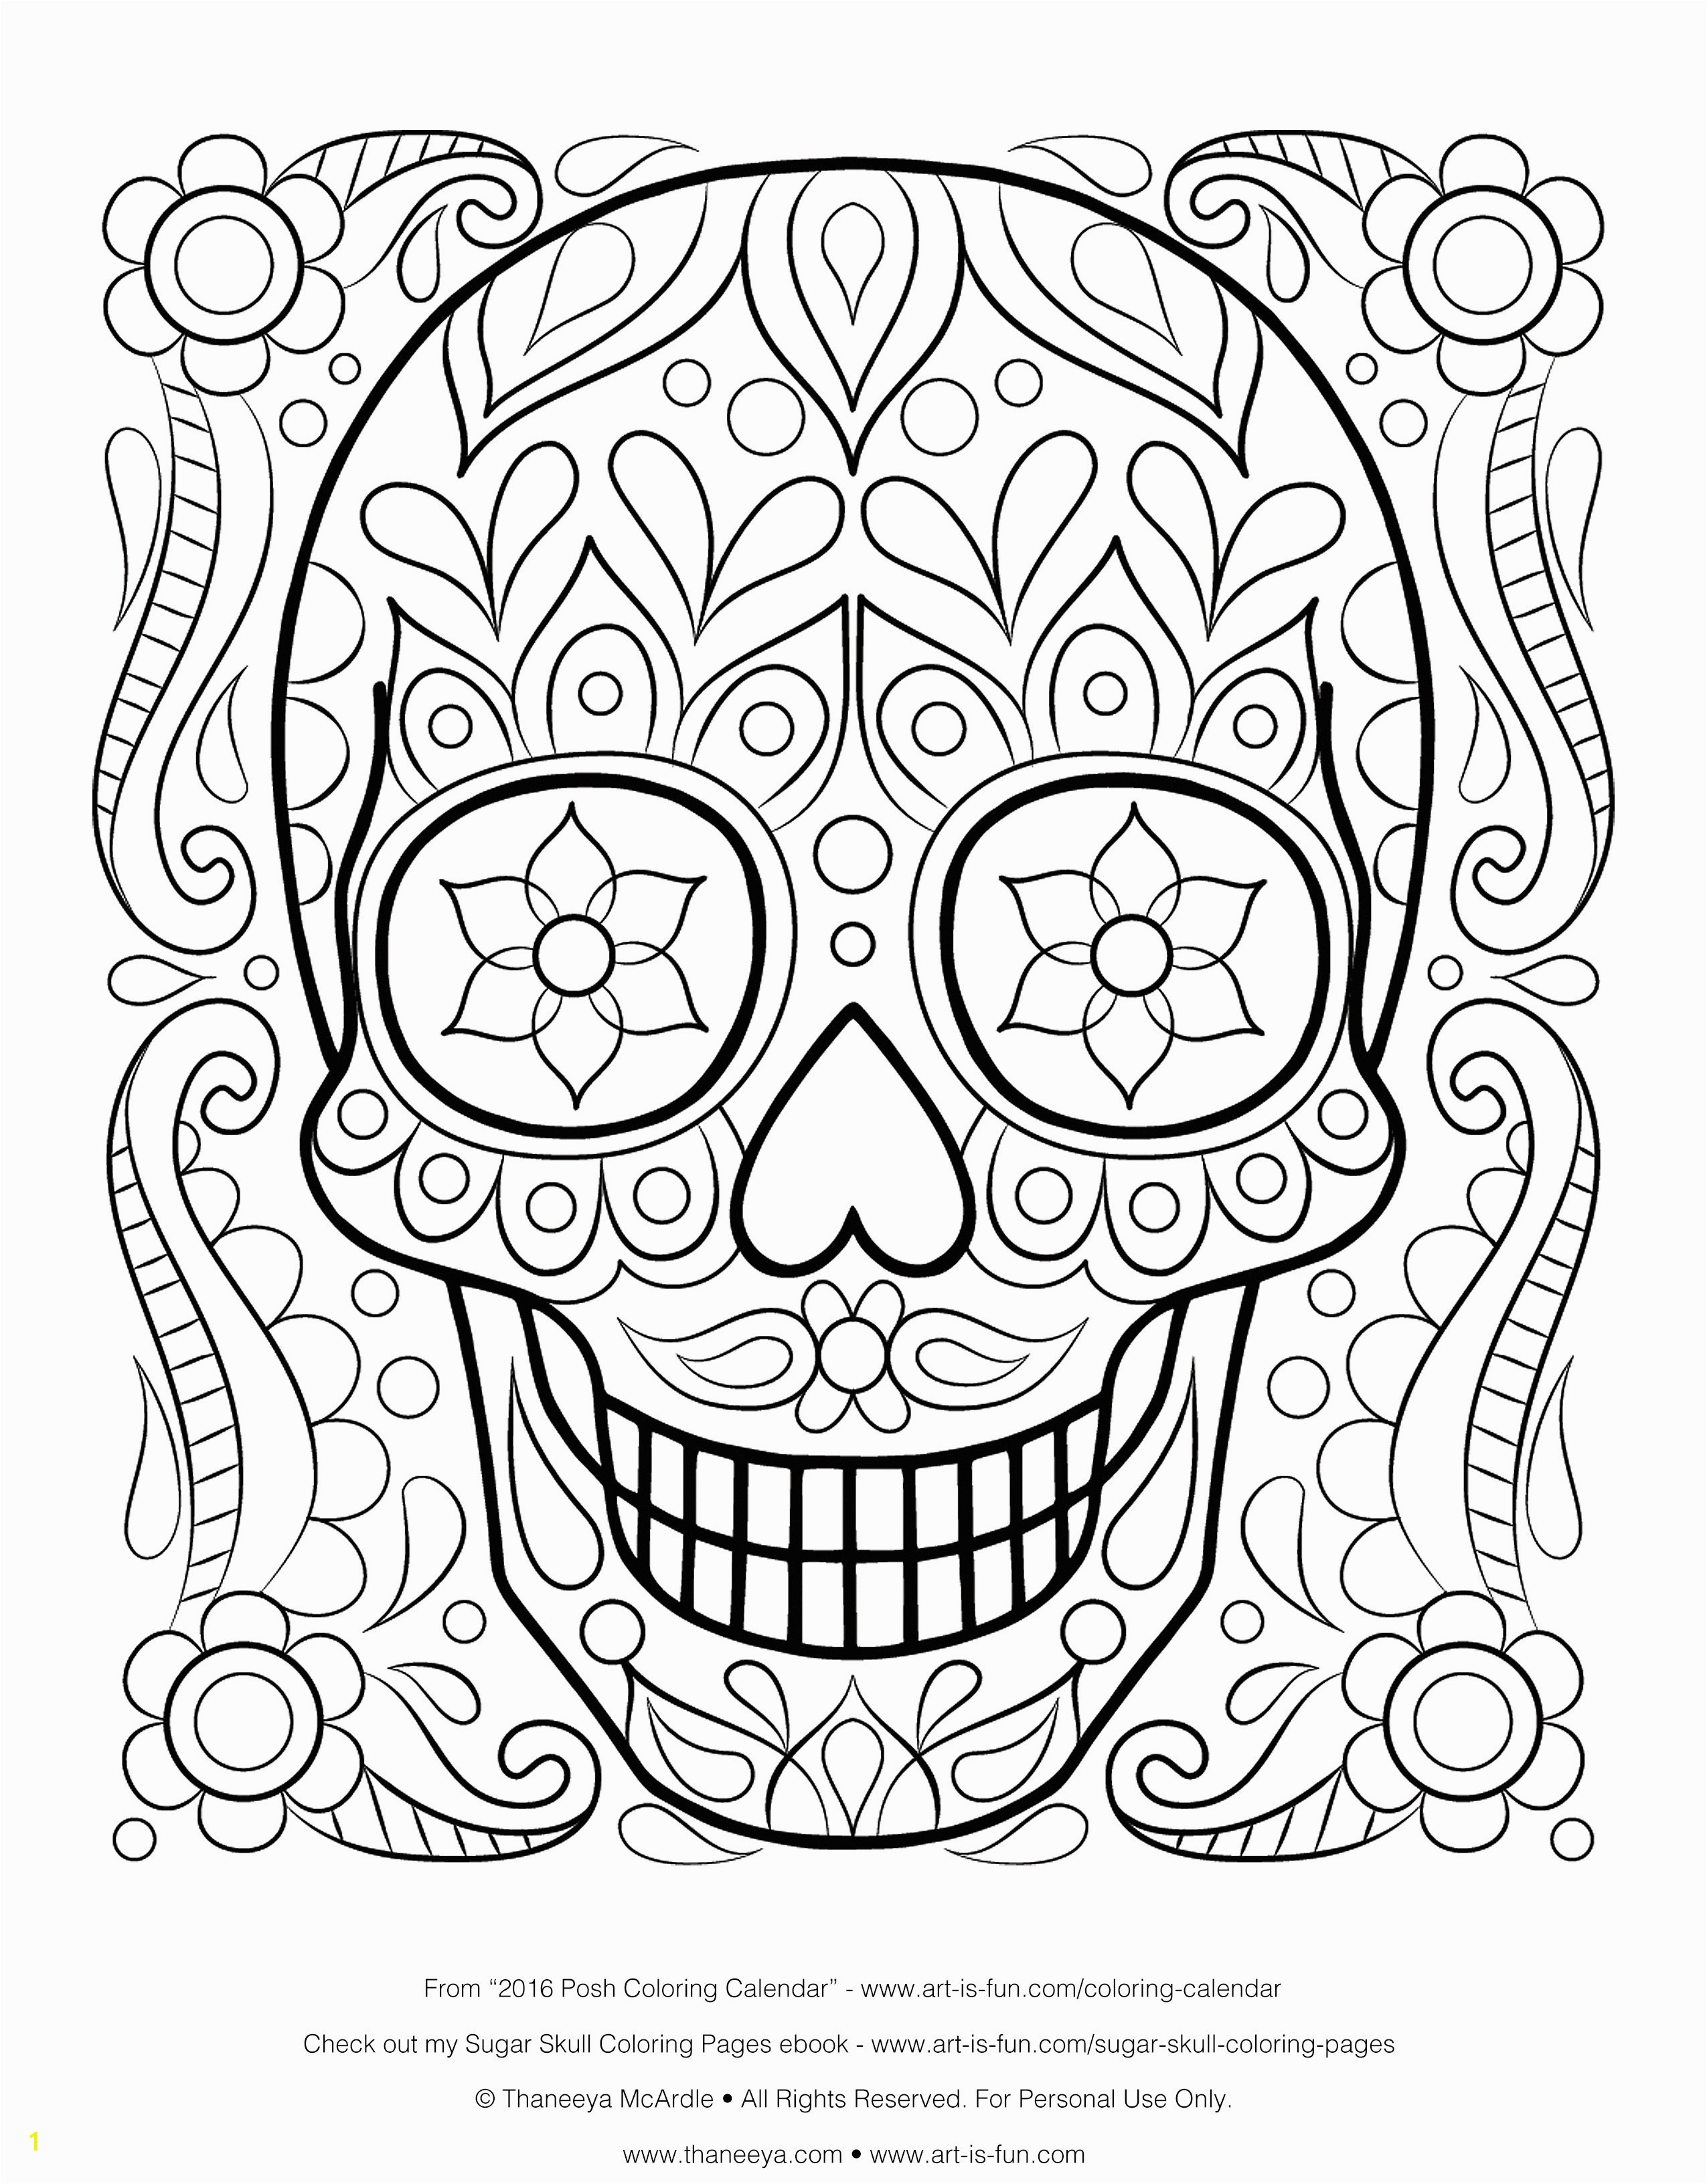 Coloring Pages to Print Fresh Free Sugar Skull Coloring Page Printable Day the Dead Coloring